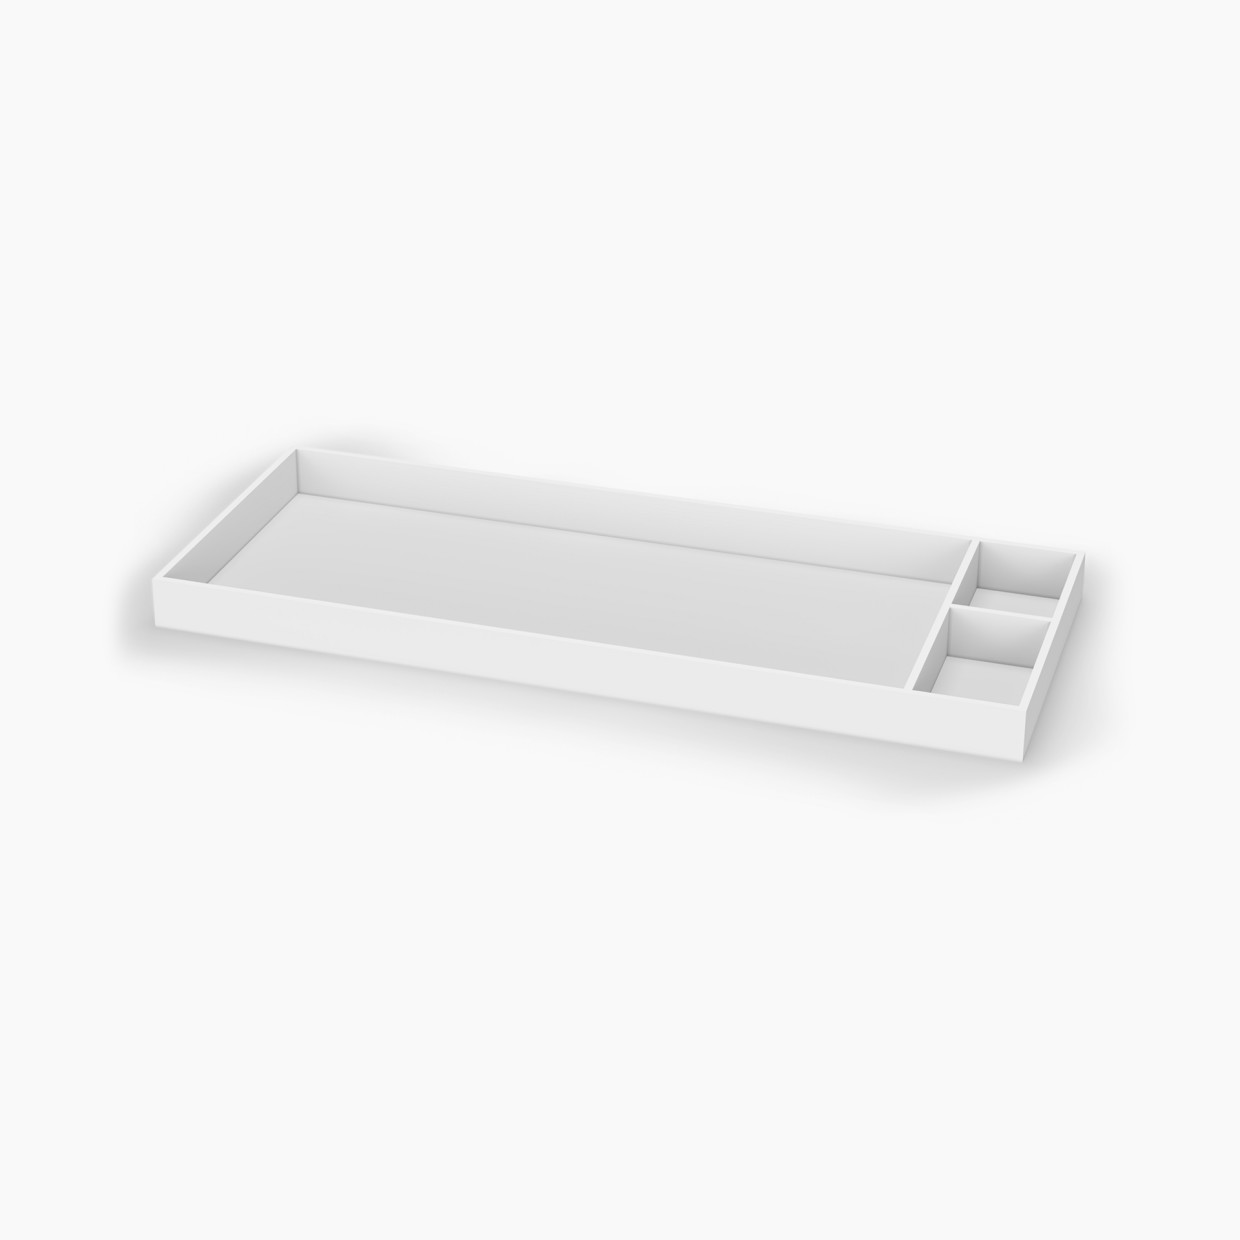 dadada Removable Changing Tray for the Brooklyn Dresser - White.